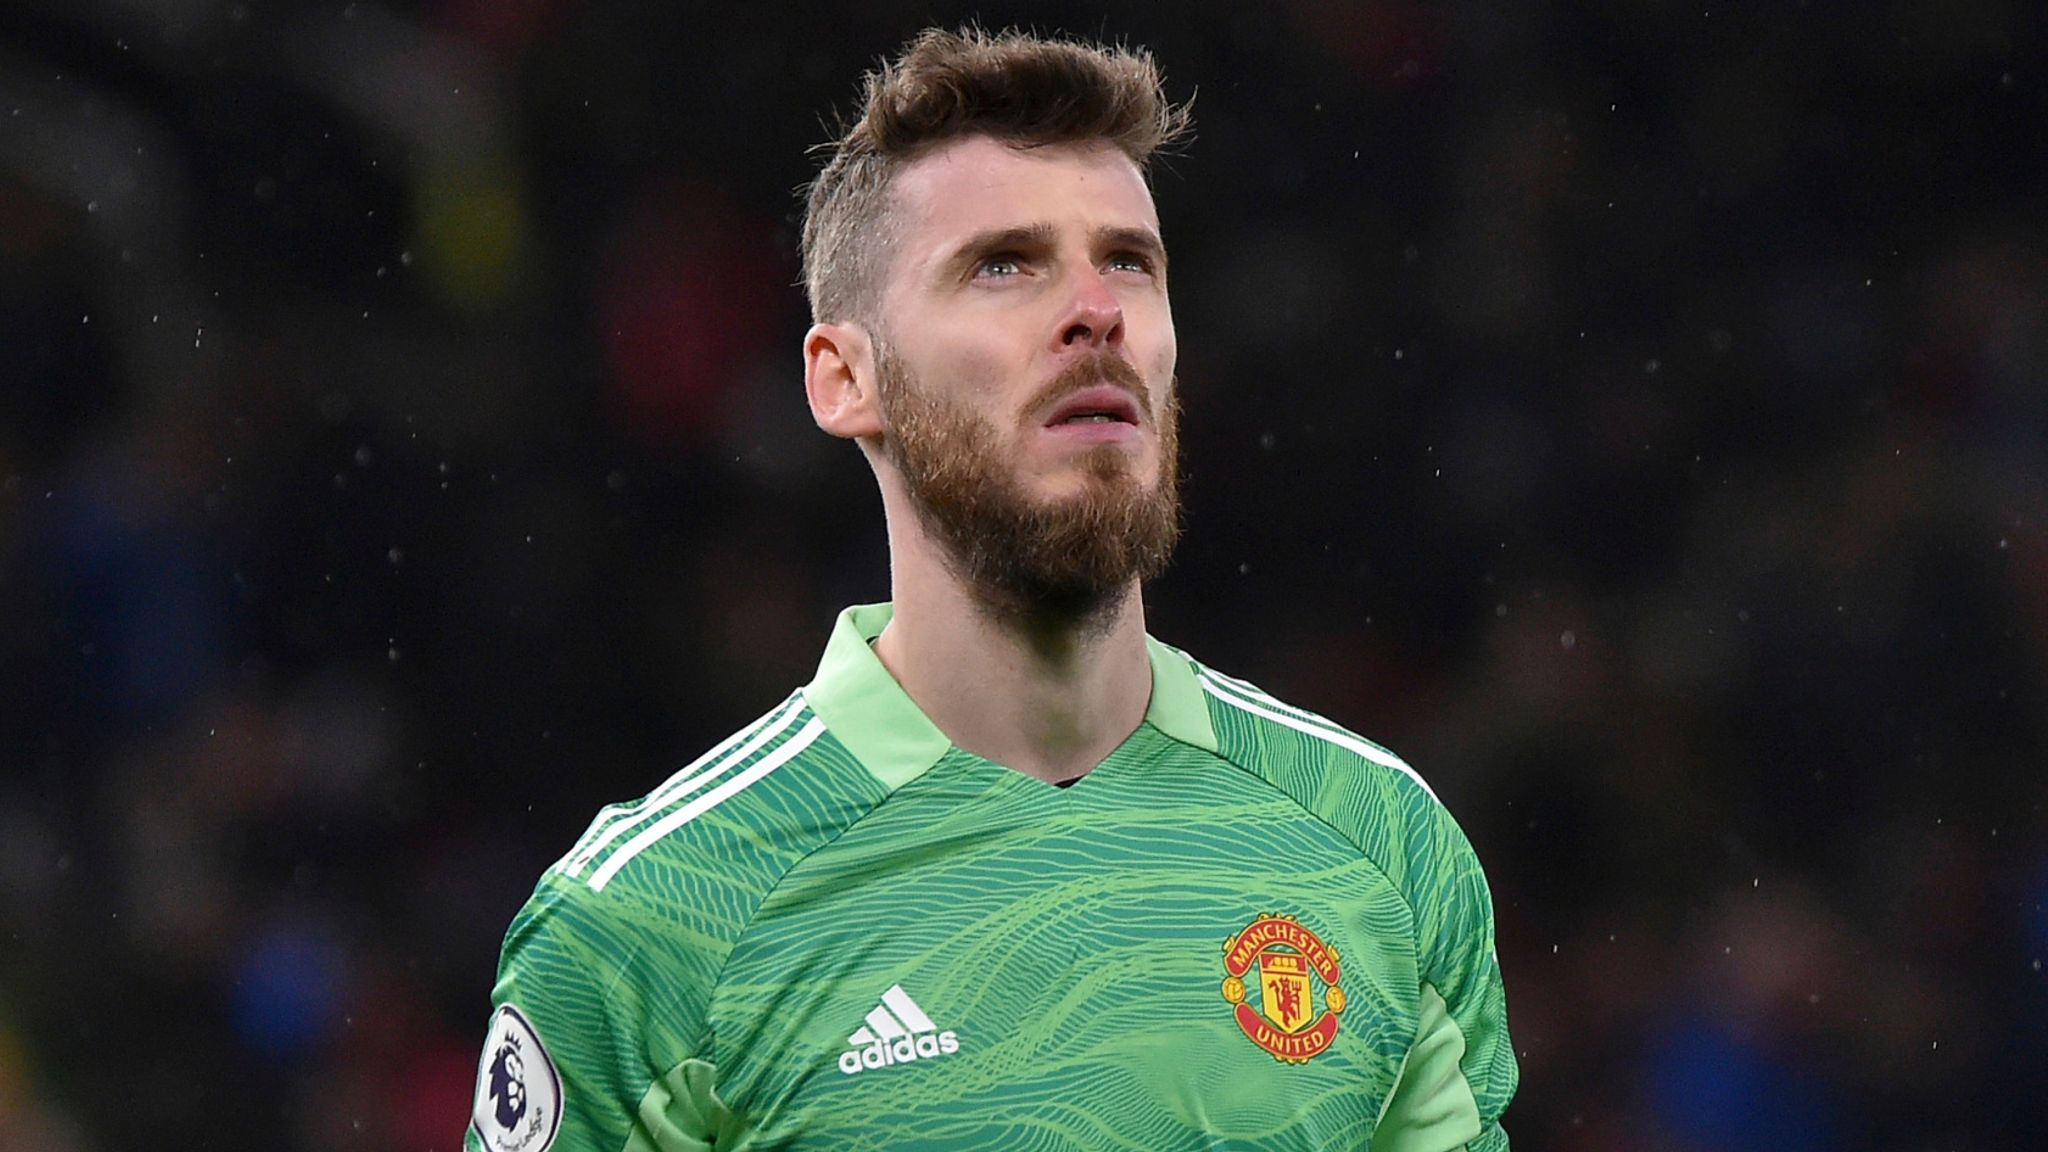 David de Gea on his future: 'I don't see myself away from Manchester United' | Football News | Sky Sports